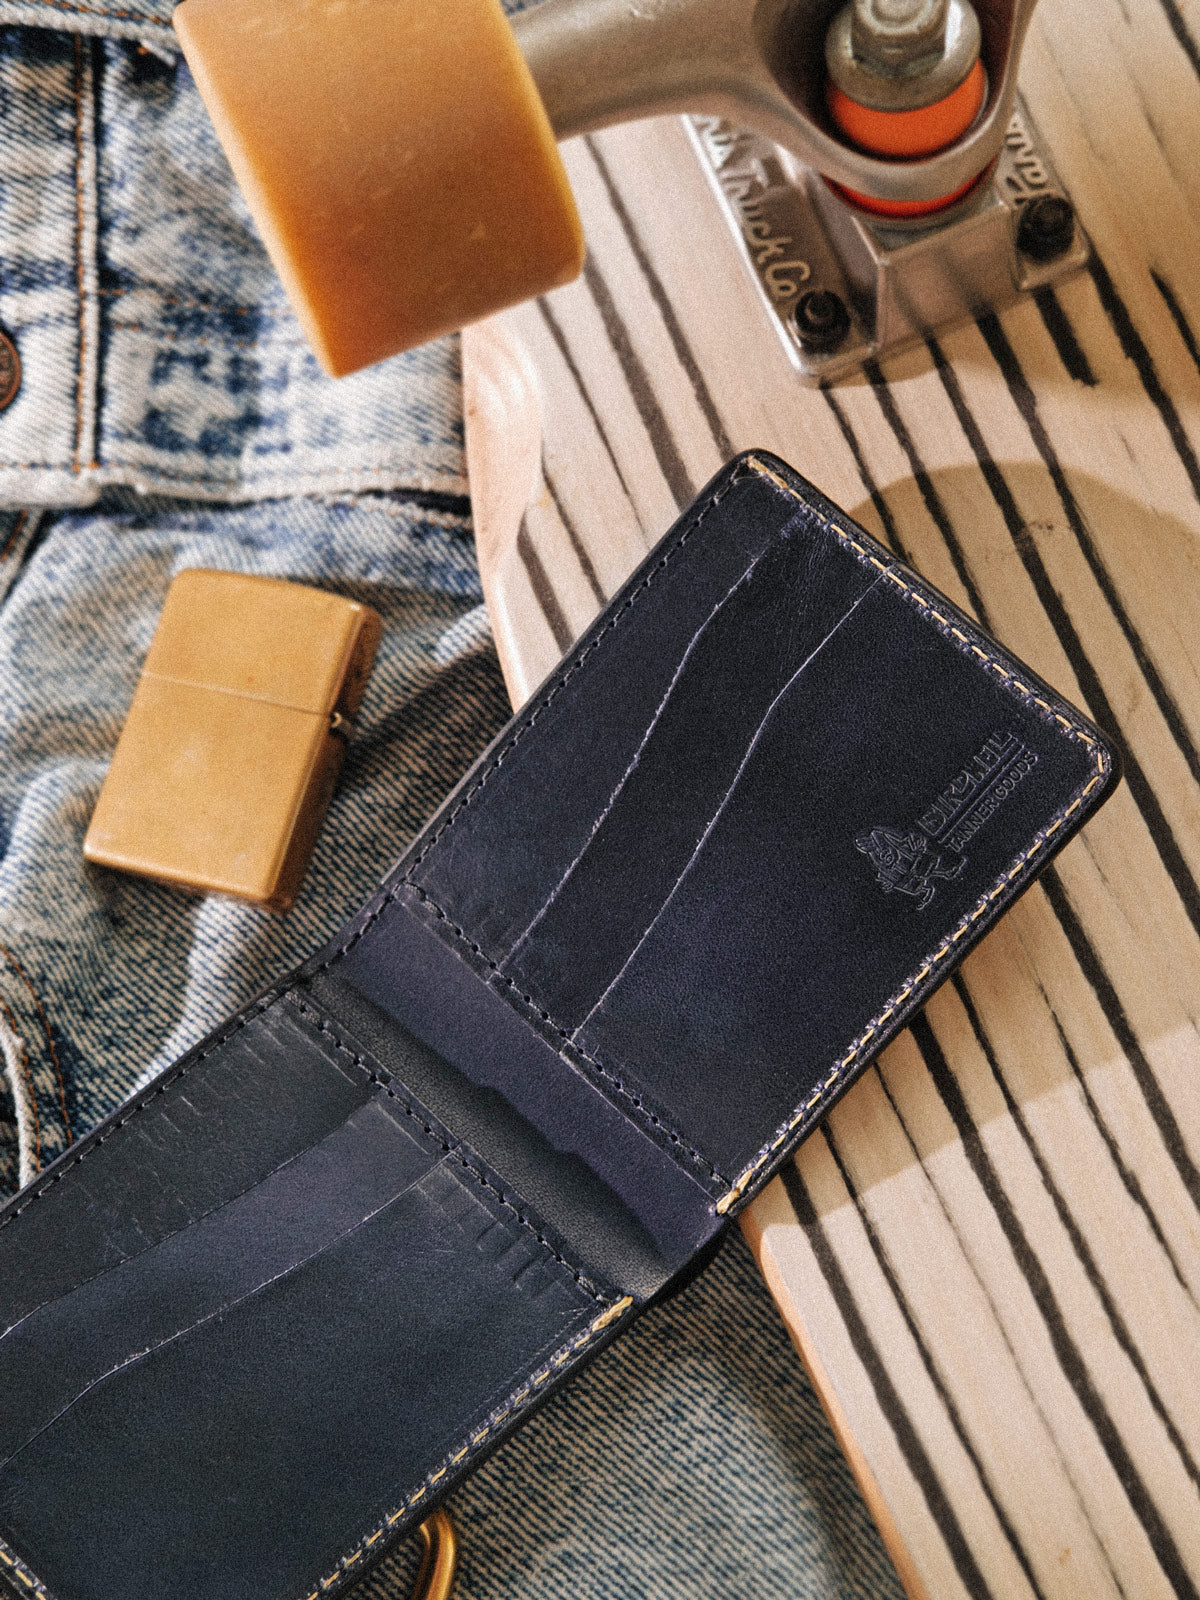 An open blue leather Bifold wallet on top of a pair of jeans, skateboard and golden lighter. 